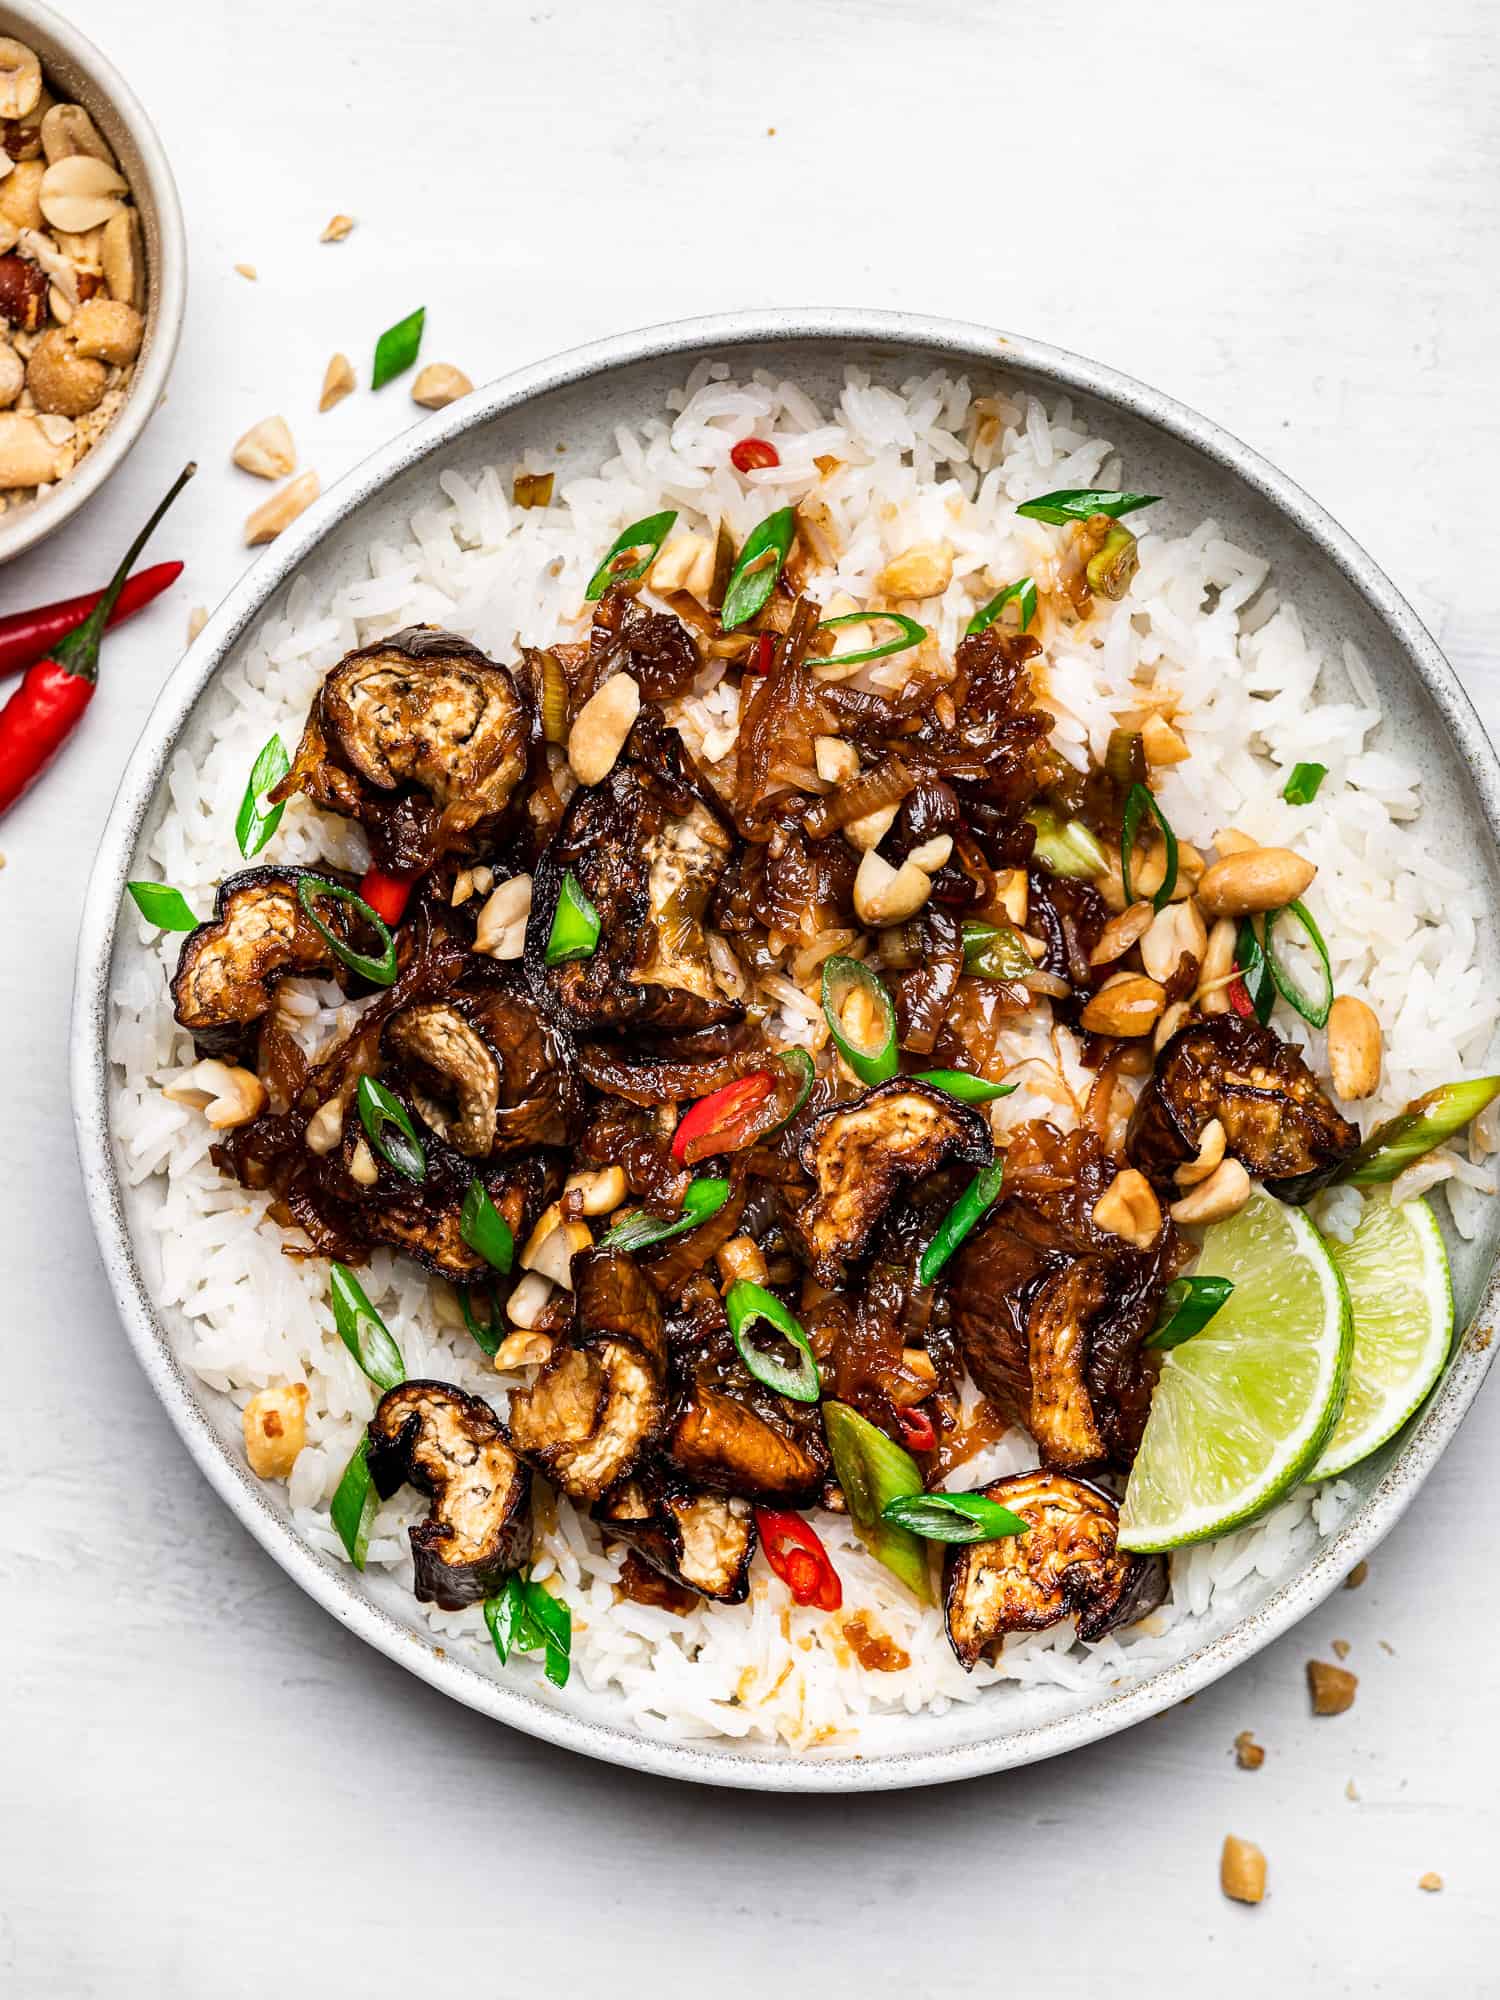 Chinese eggplant stir-fry served over coconut rice